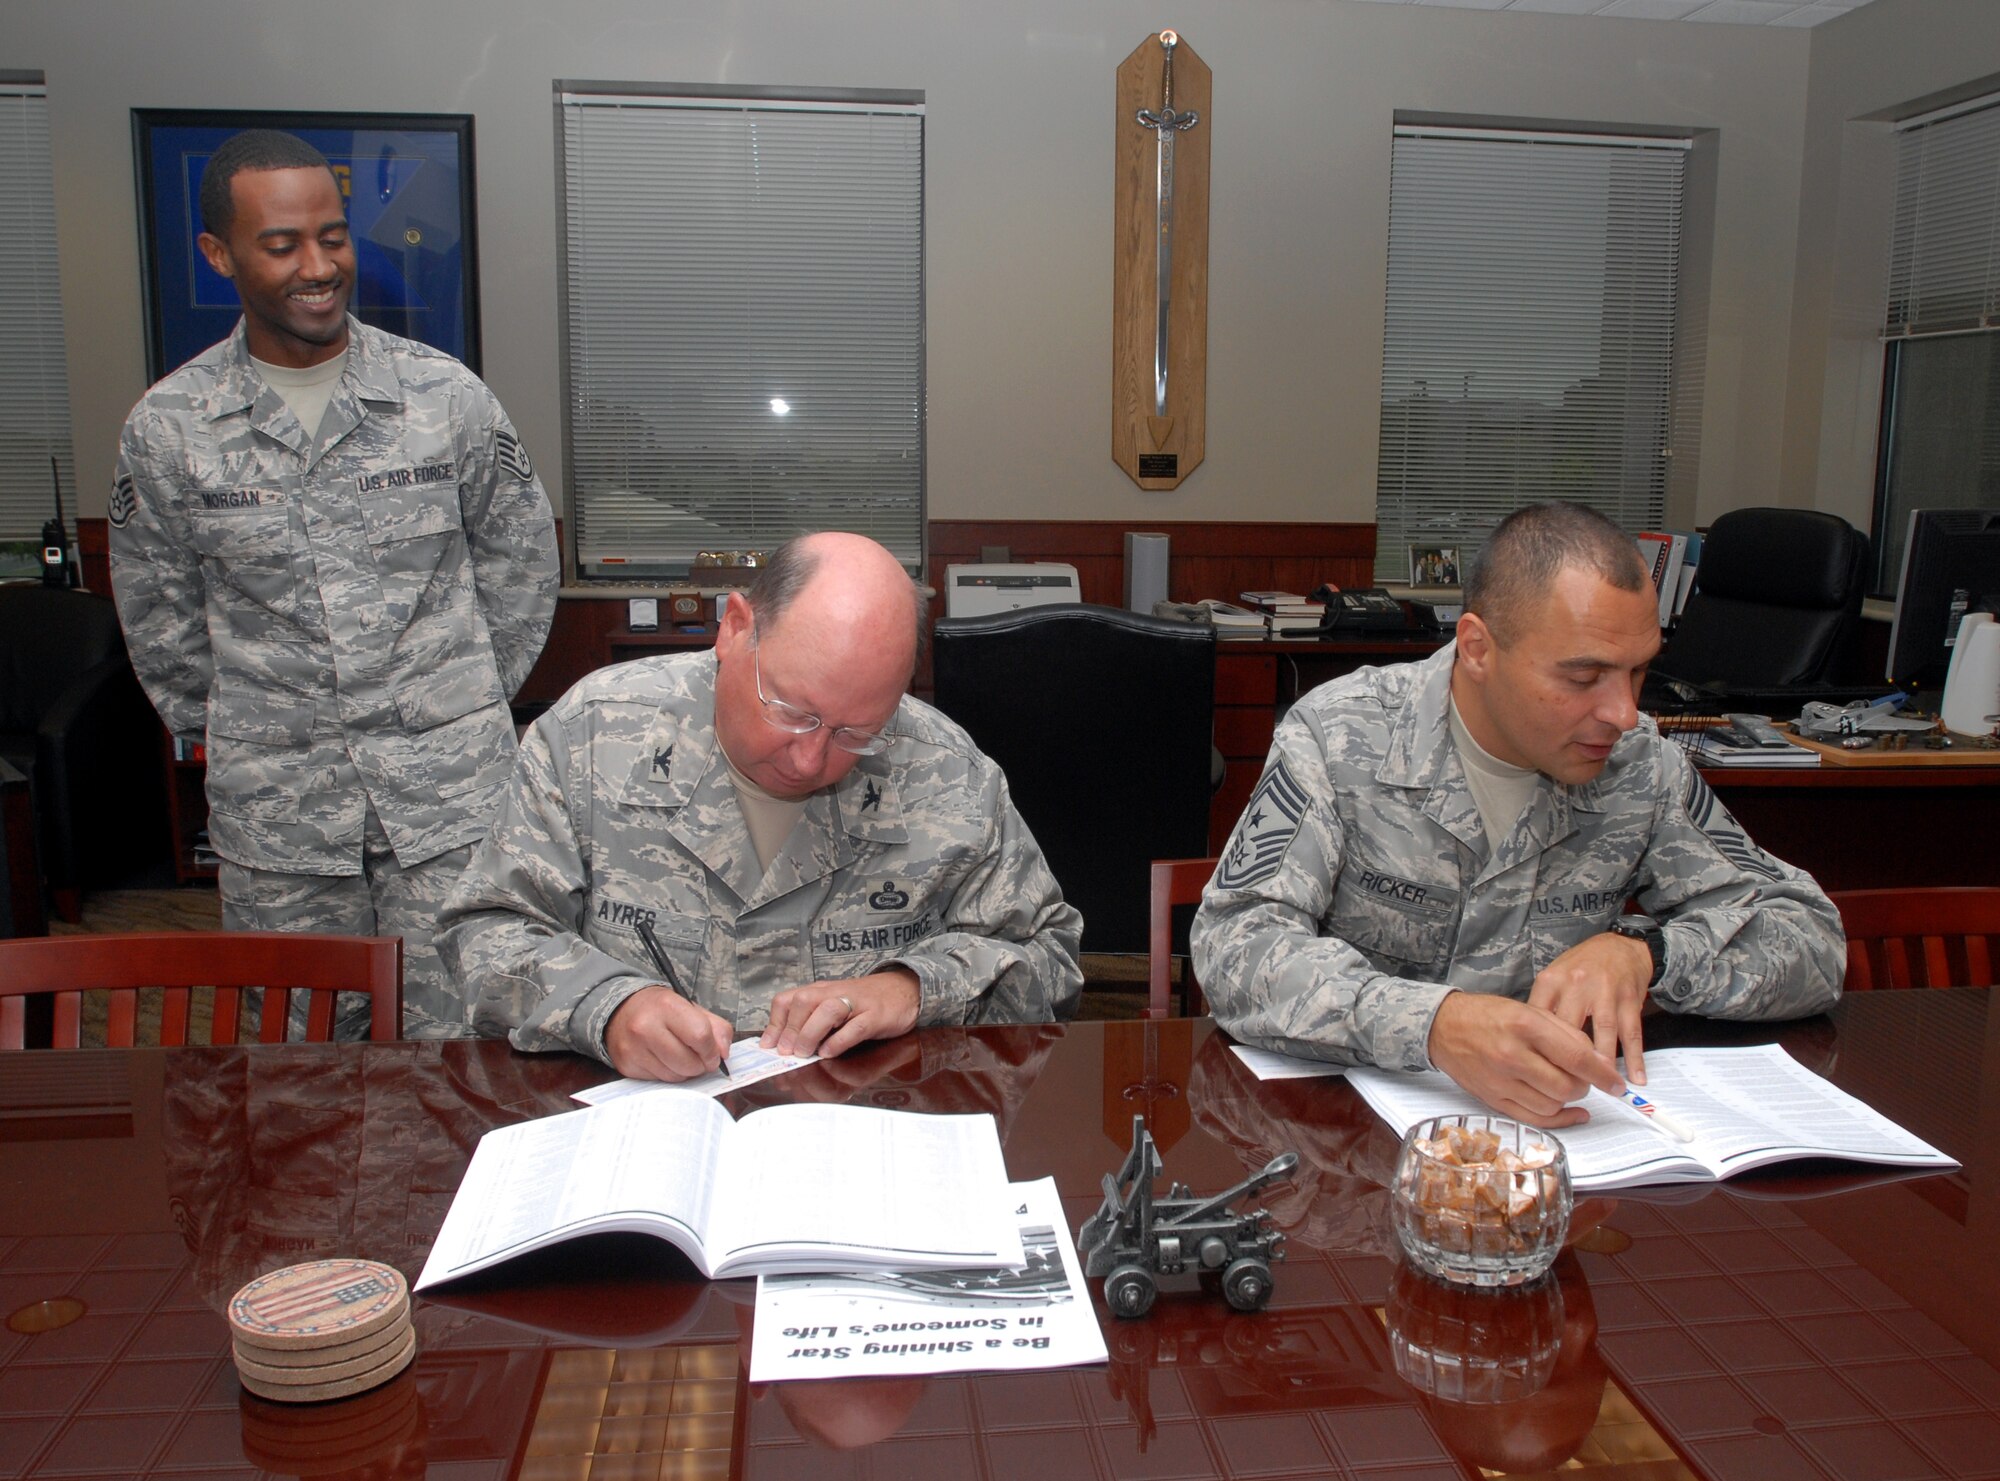 Colonel Richard Ayres (center), 17th Training Wing commander, and Chief Master Sgt. Frederick Ricker (right), 17 TRW command chief master sergeant, sign up for the 2008 Combined Federal Campaign with the help of Staff Sgt. Christopher Morgan, a campaign volunteer. (U.S. Air Force photo by Paul Martin)